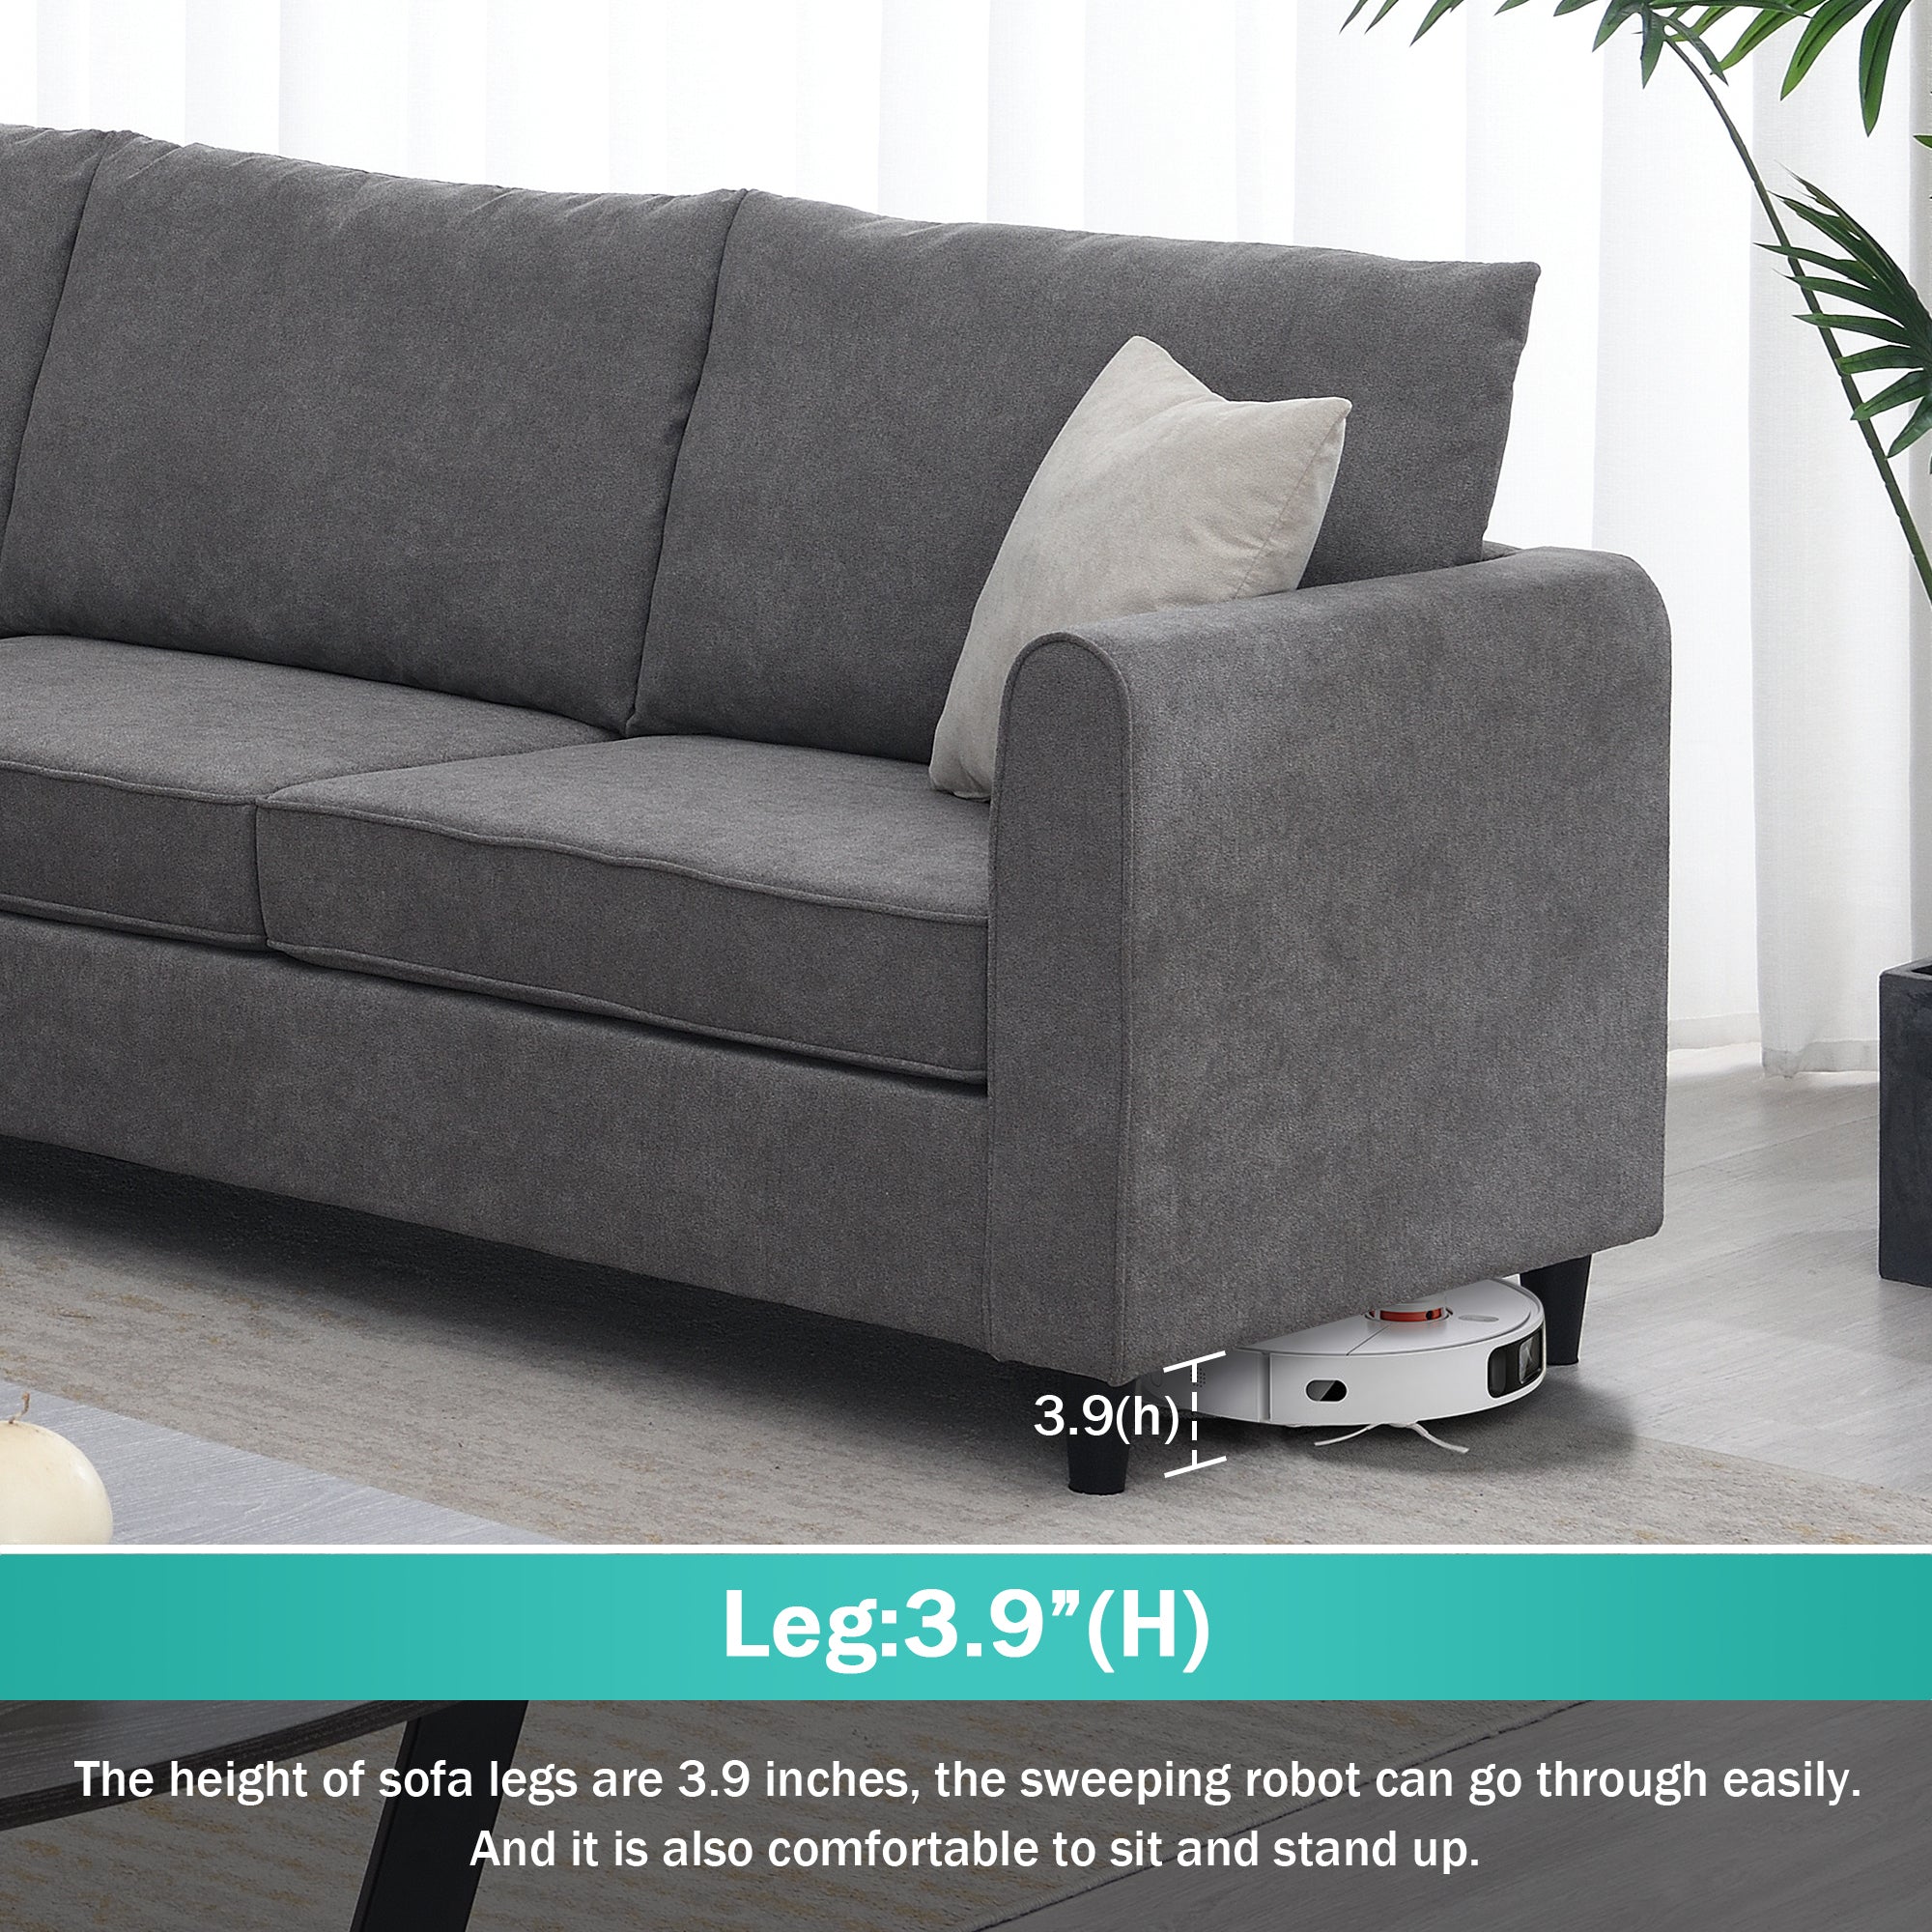 [VIDEO provided] [New] 91*91" Modern Upholstered Living Room Sectional Sofa, L Shape Furniture Couch with 3 Pillows